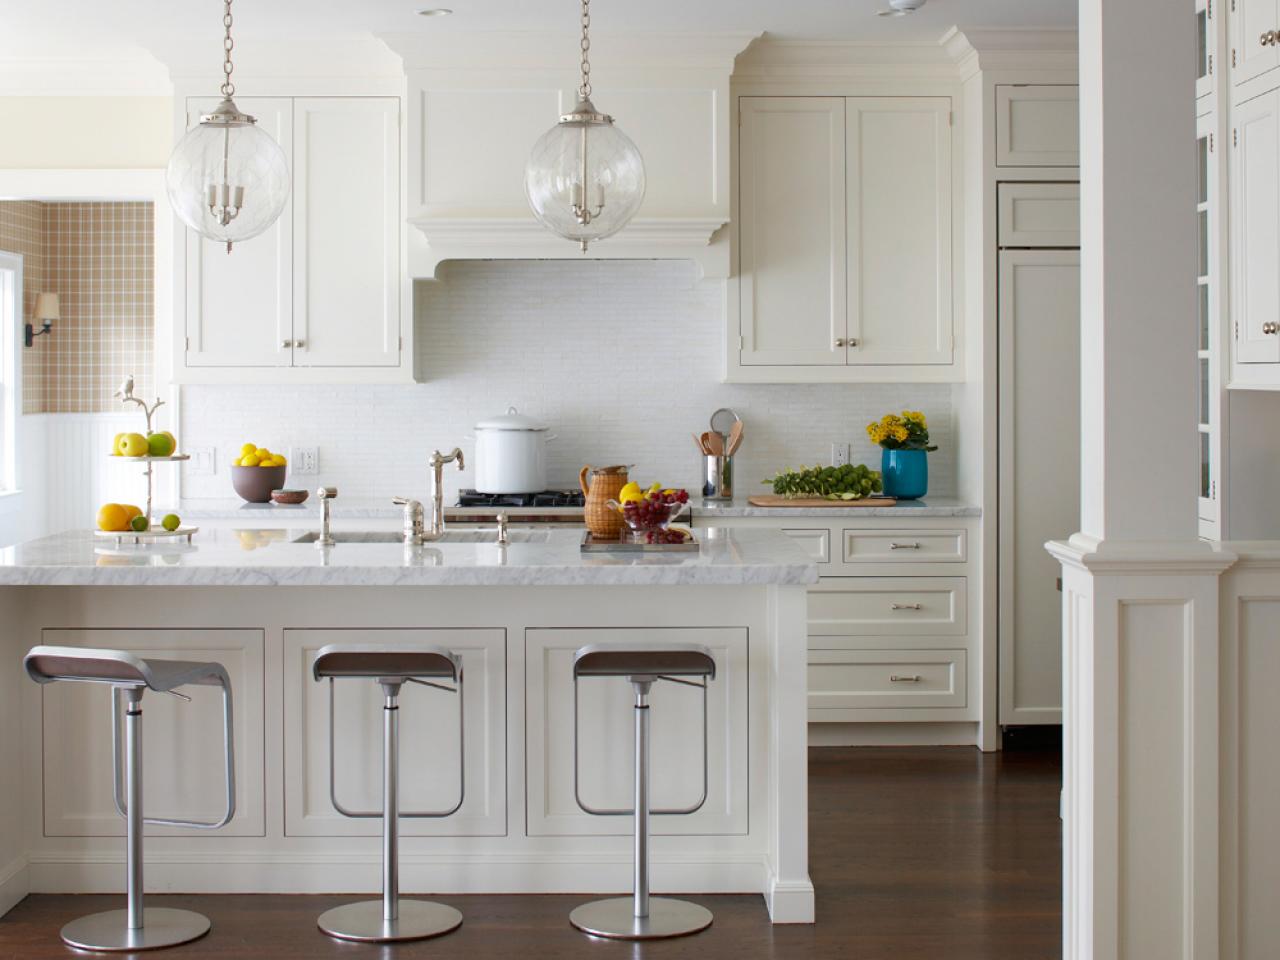 Decor Accents to Pair with an All-White Kitchen